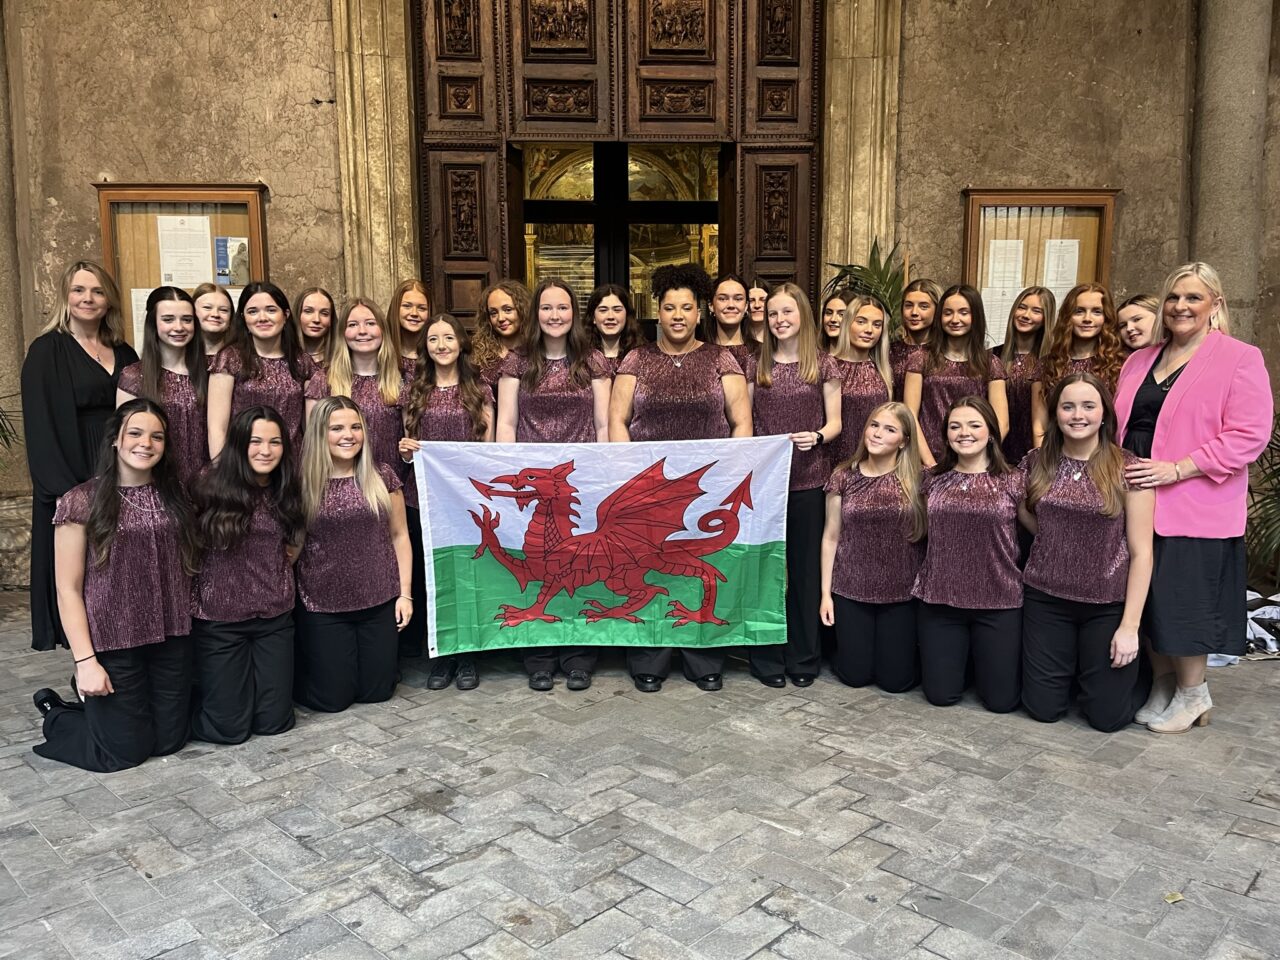 A large group posing for a photo and holding a Welsh flag. They are all wearing similar outfits and appear to be in some sort of gallery/museum.